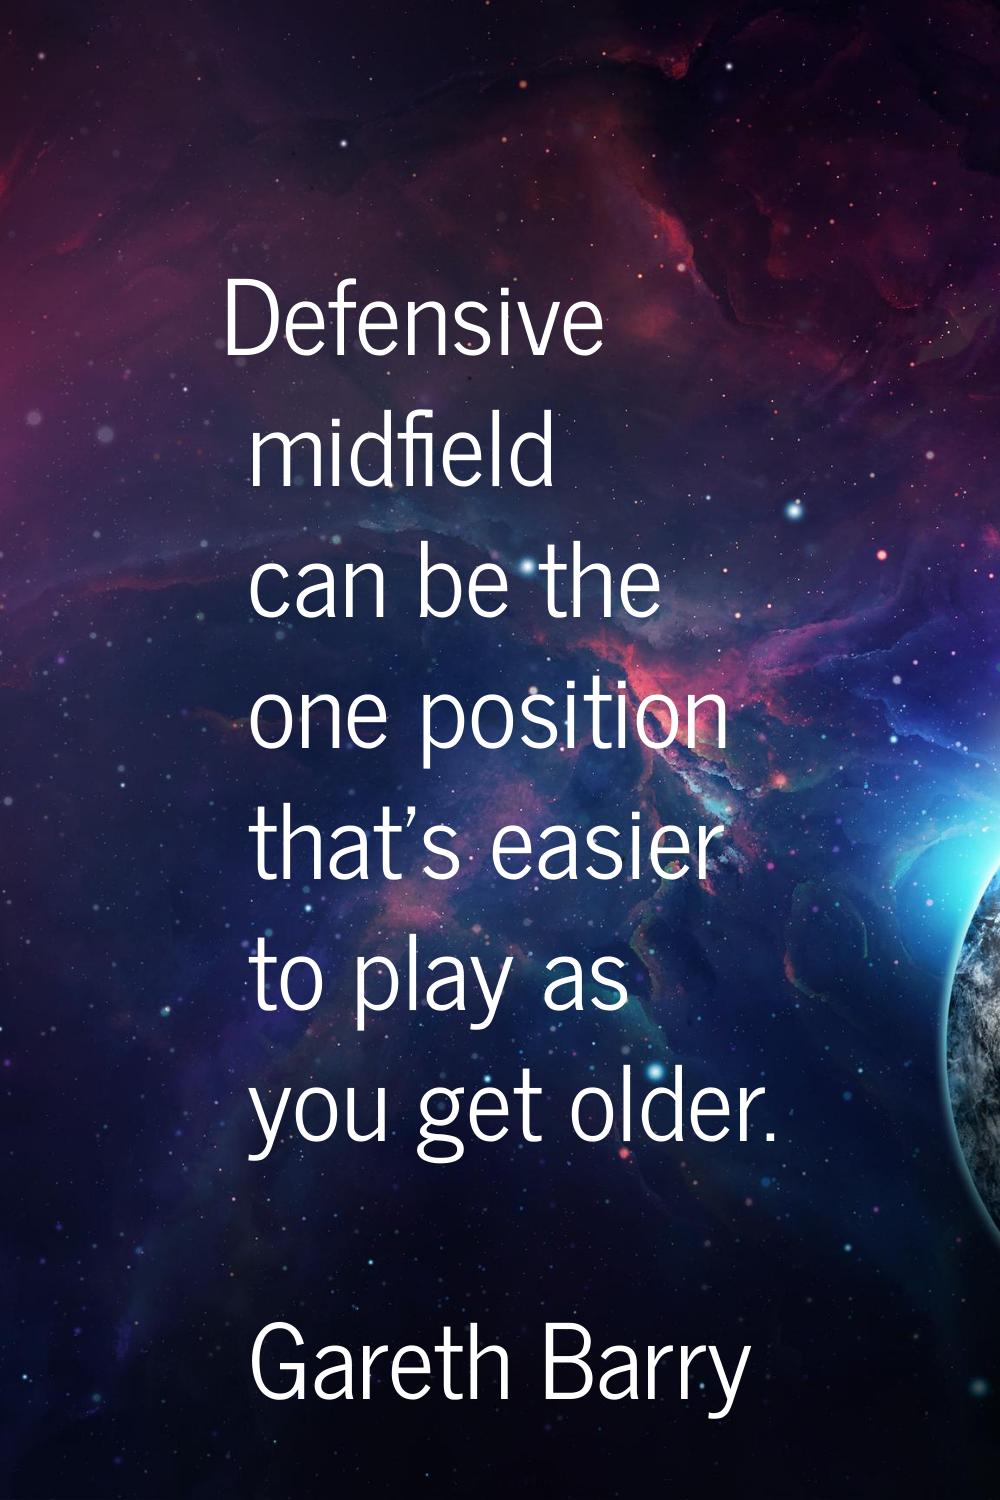 Defensive midfield can be the one position that's easier to play as you get older.